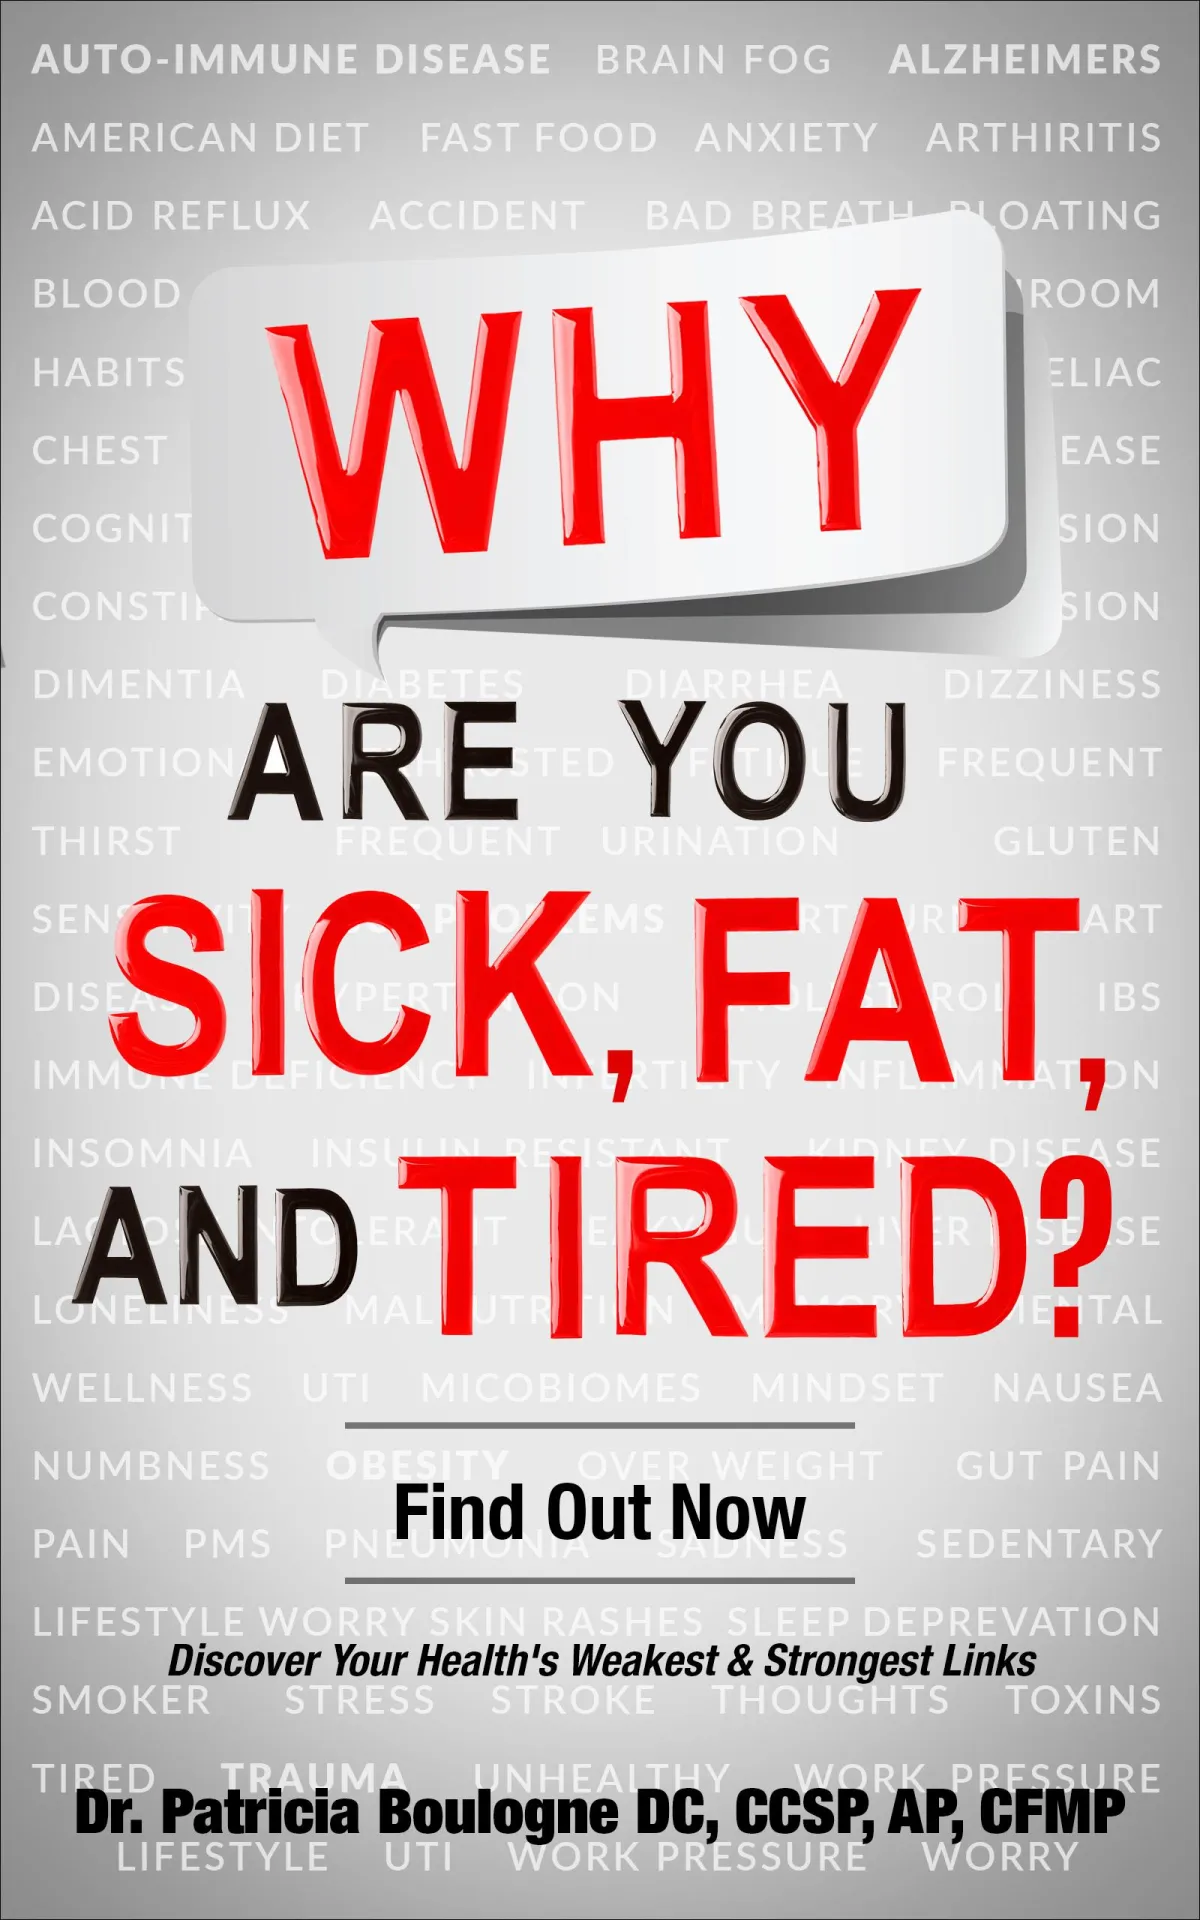 Why Are You Sick, Fat, and Tired by Dr. Patricia Boulogne